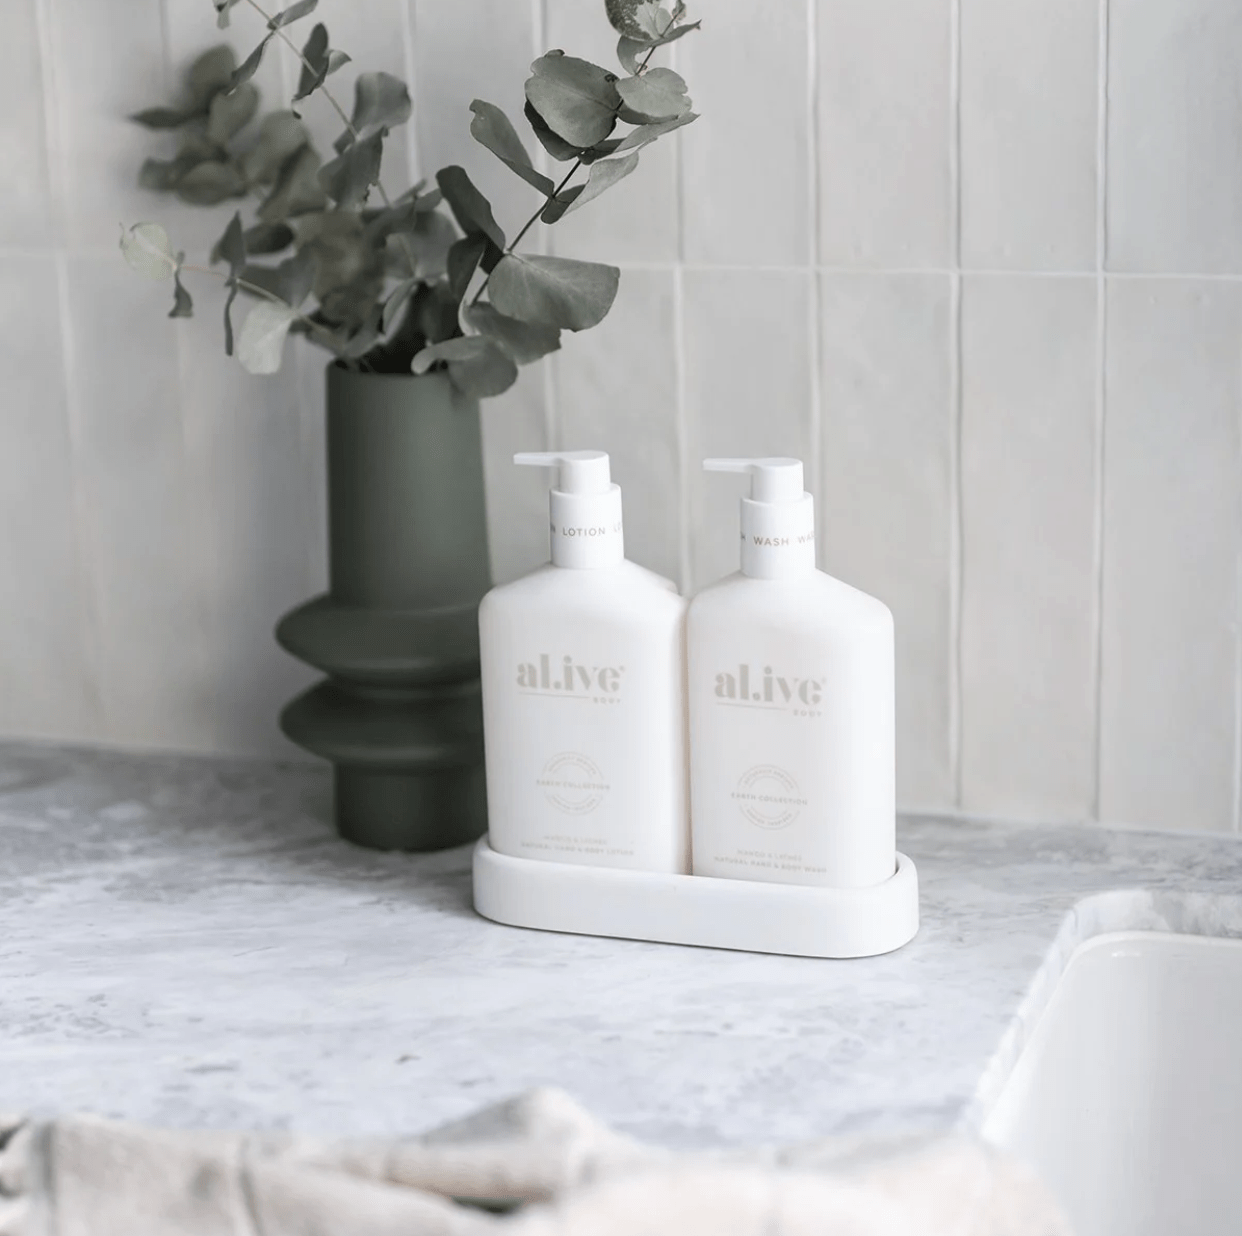 Hand & Body Wash Duo + Tray - Mango & Lychee House of Dudley